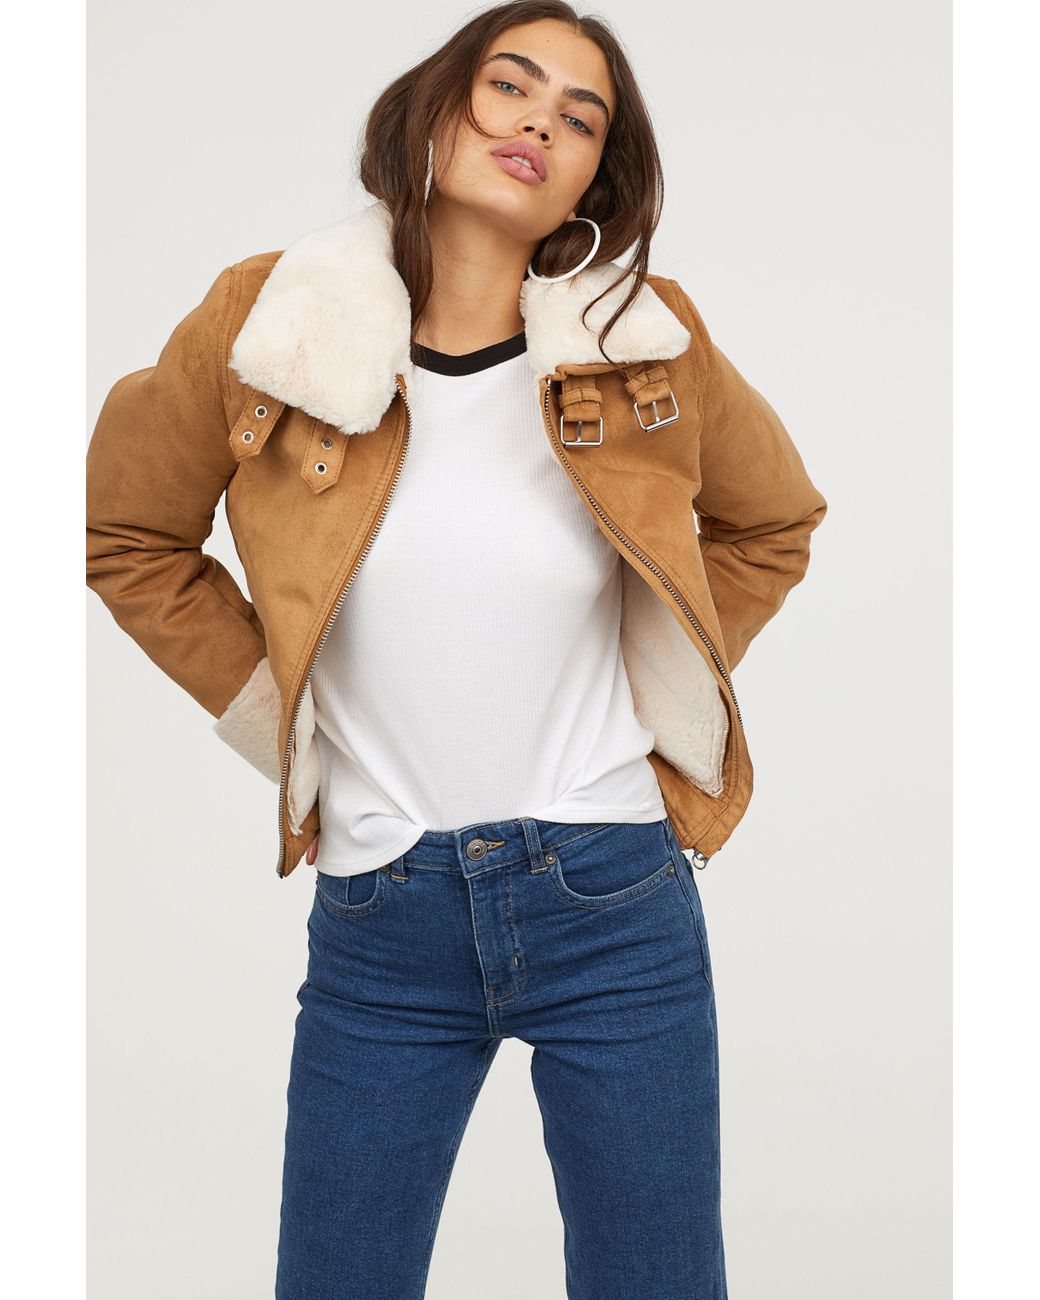 H&M Jacket With Faux Fur Lining in Natural | Lyst